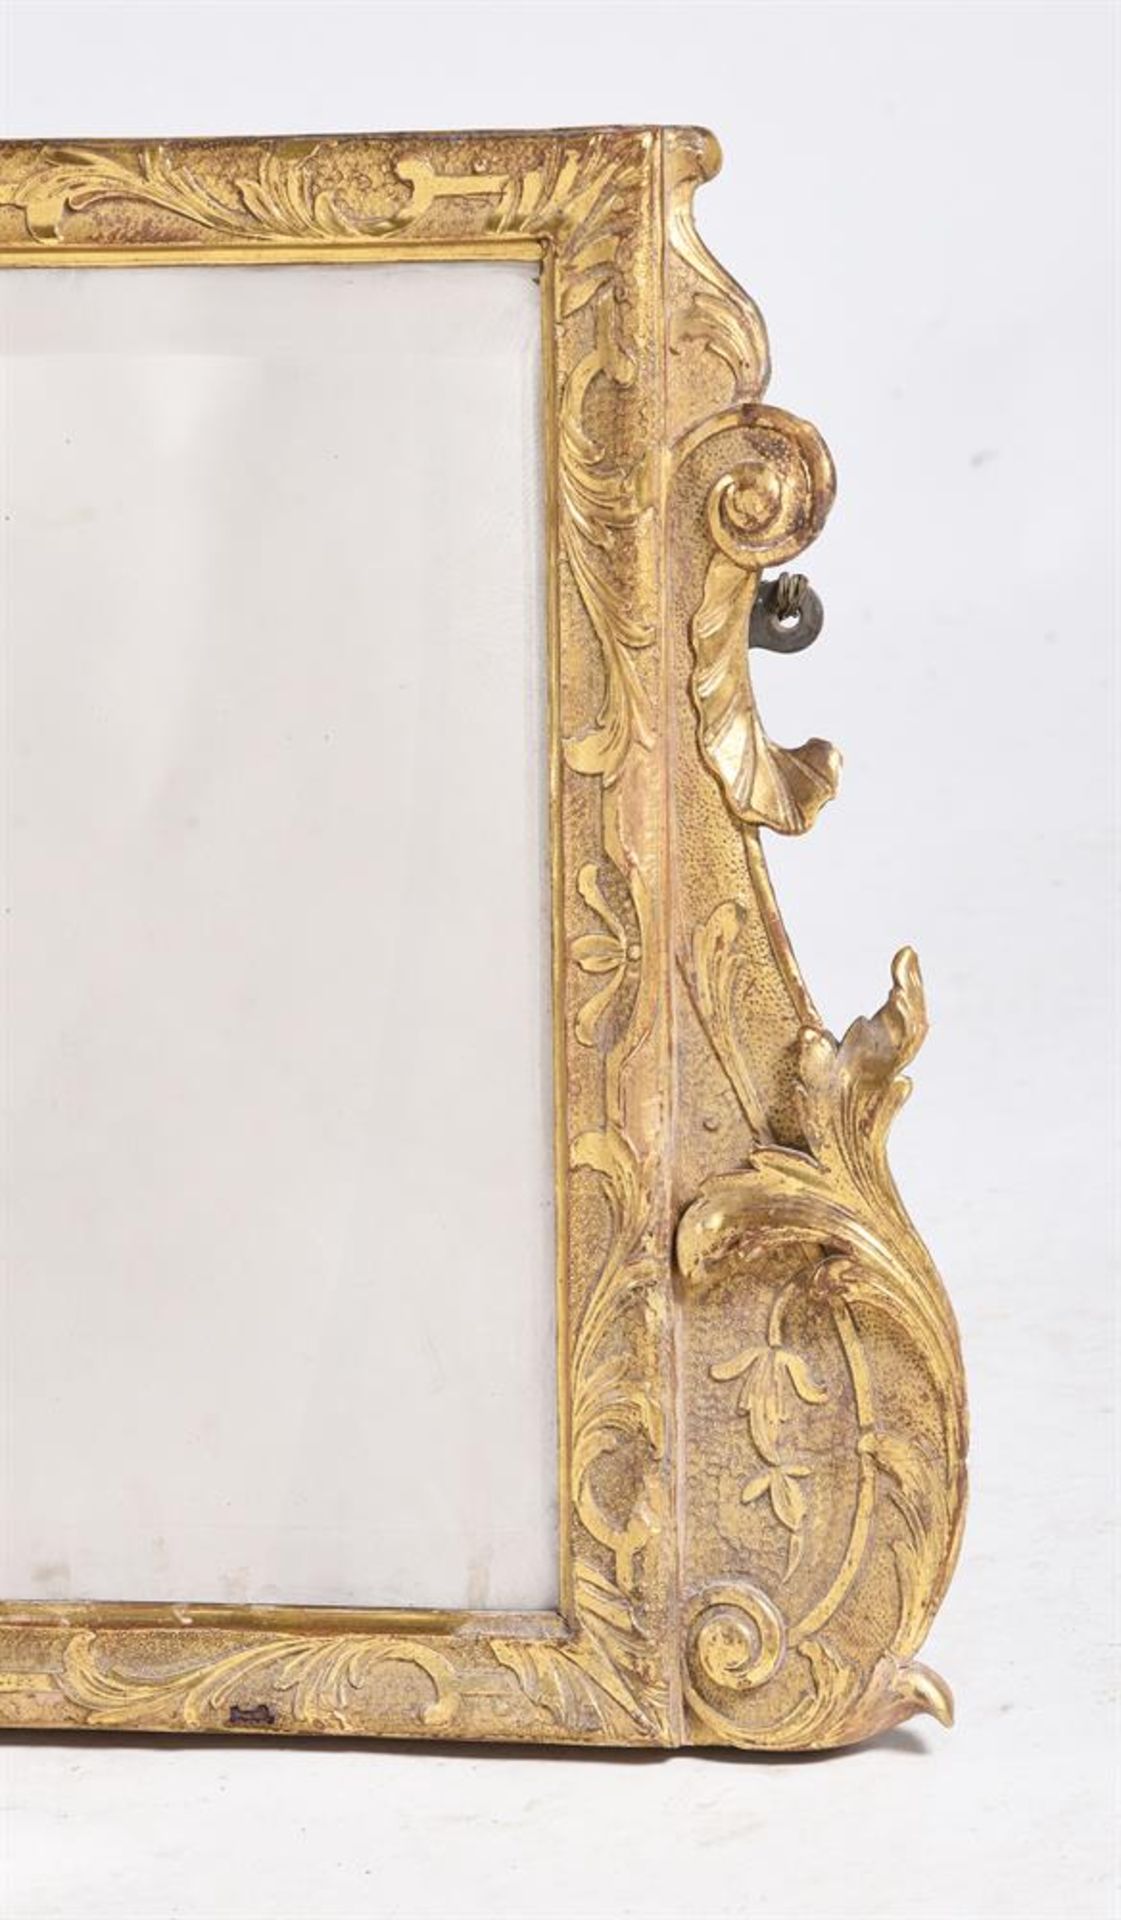 A GEORGE II GILTWOOD AND GESSO 'TRIPTYCH' MIRROR, CIRCA 1730 - Image 2 of 3